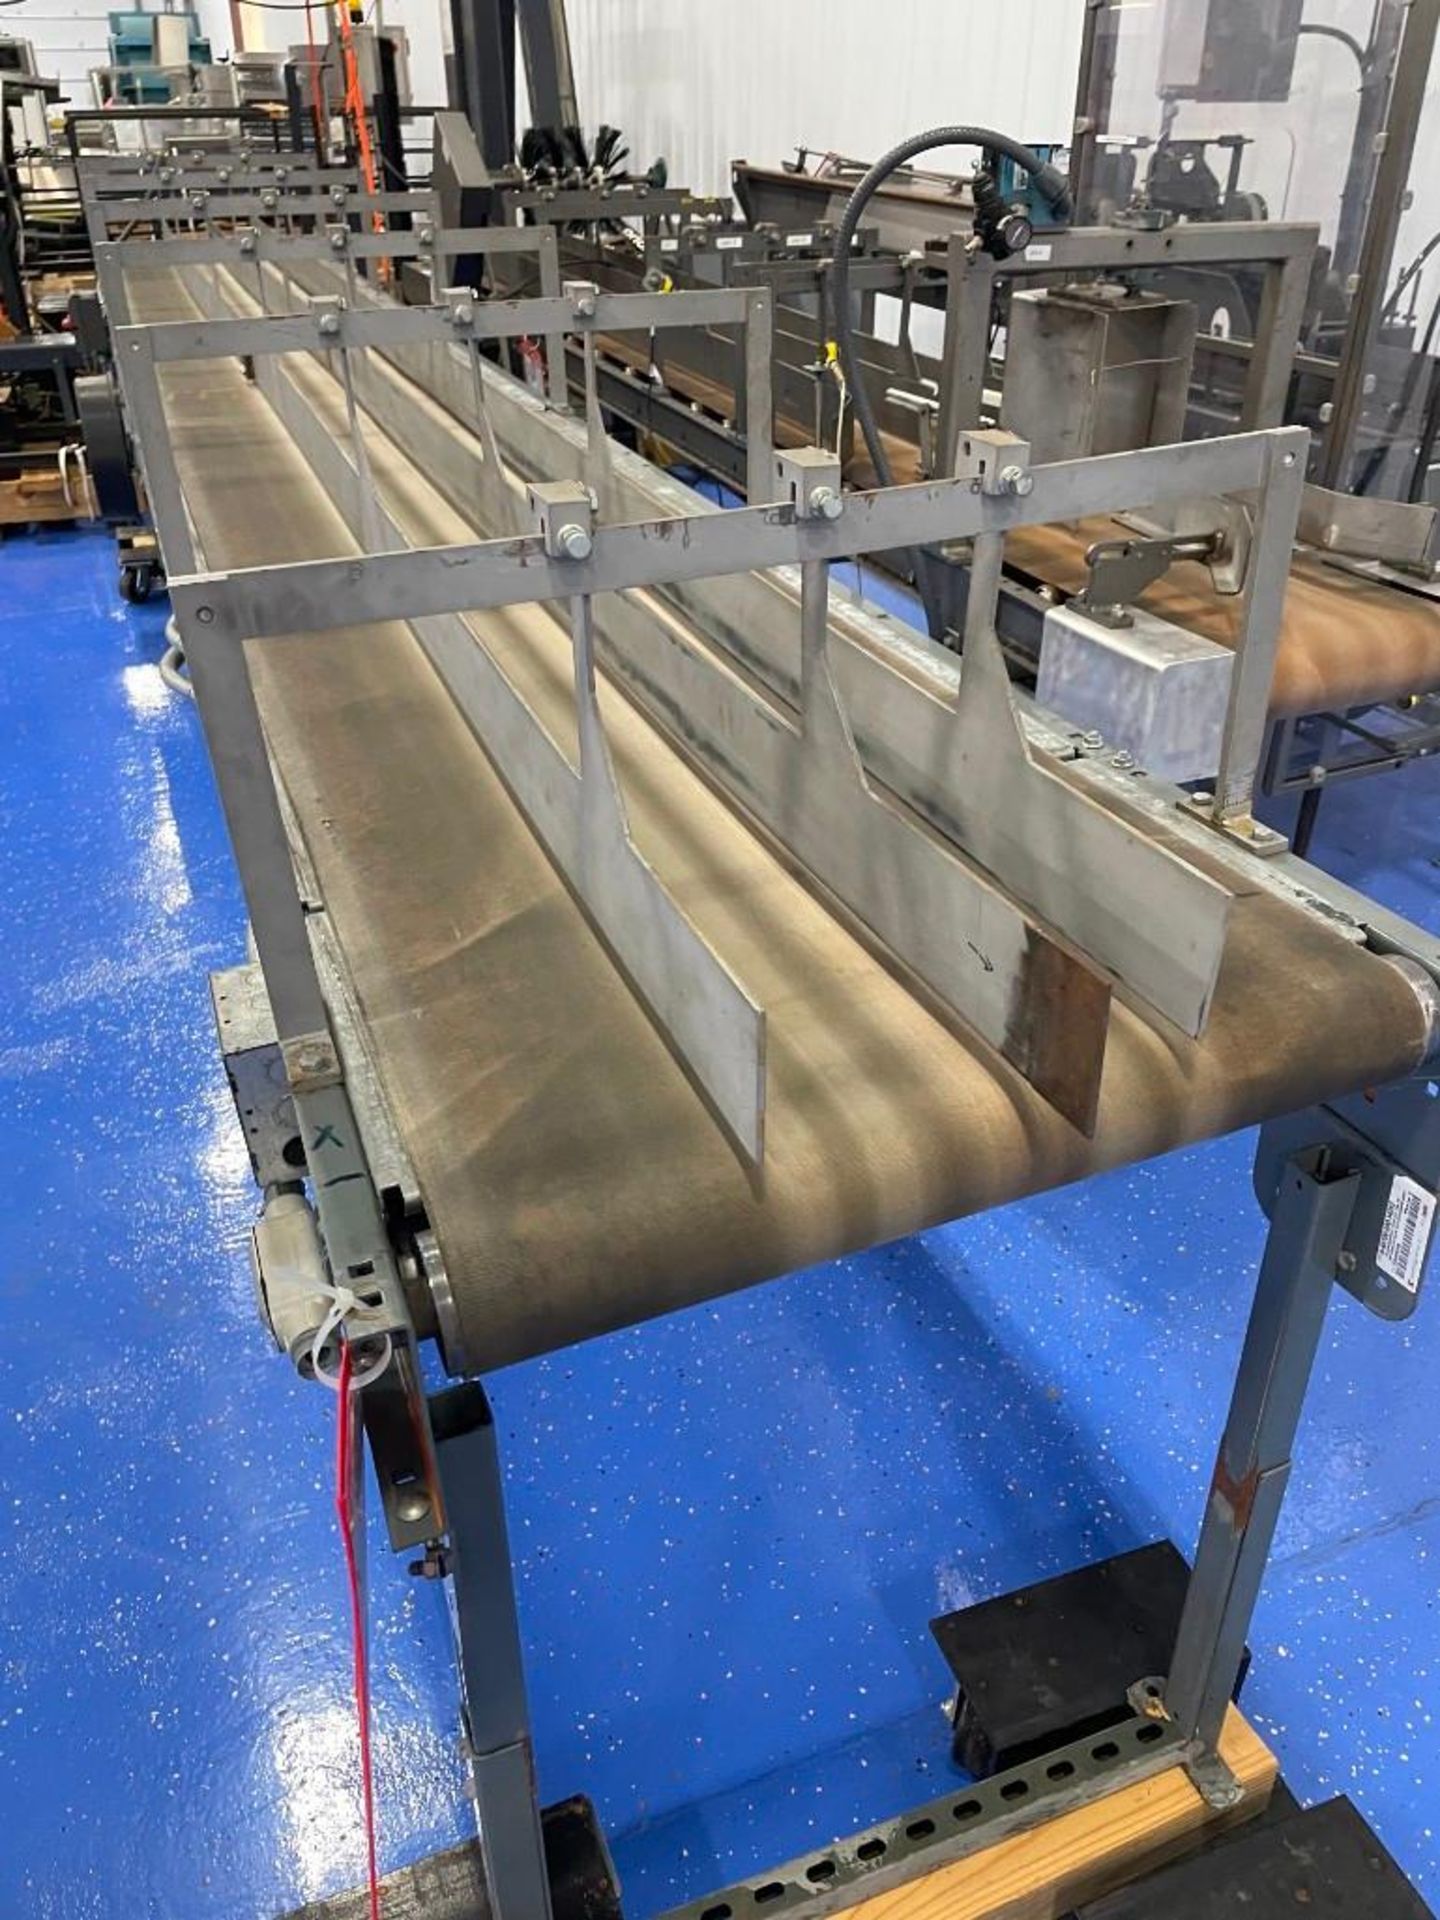 2008 Pearson BE60 6-Pack Beverage Carrier Erector with Twin Lane Conveyor - Image 6 of 17